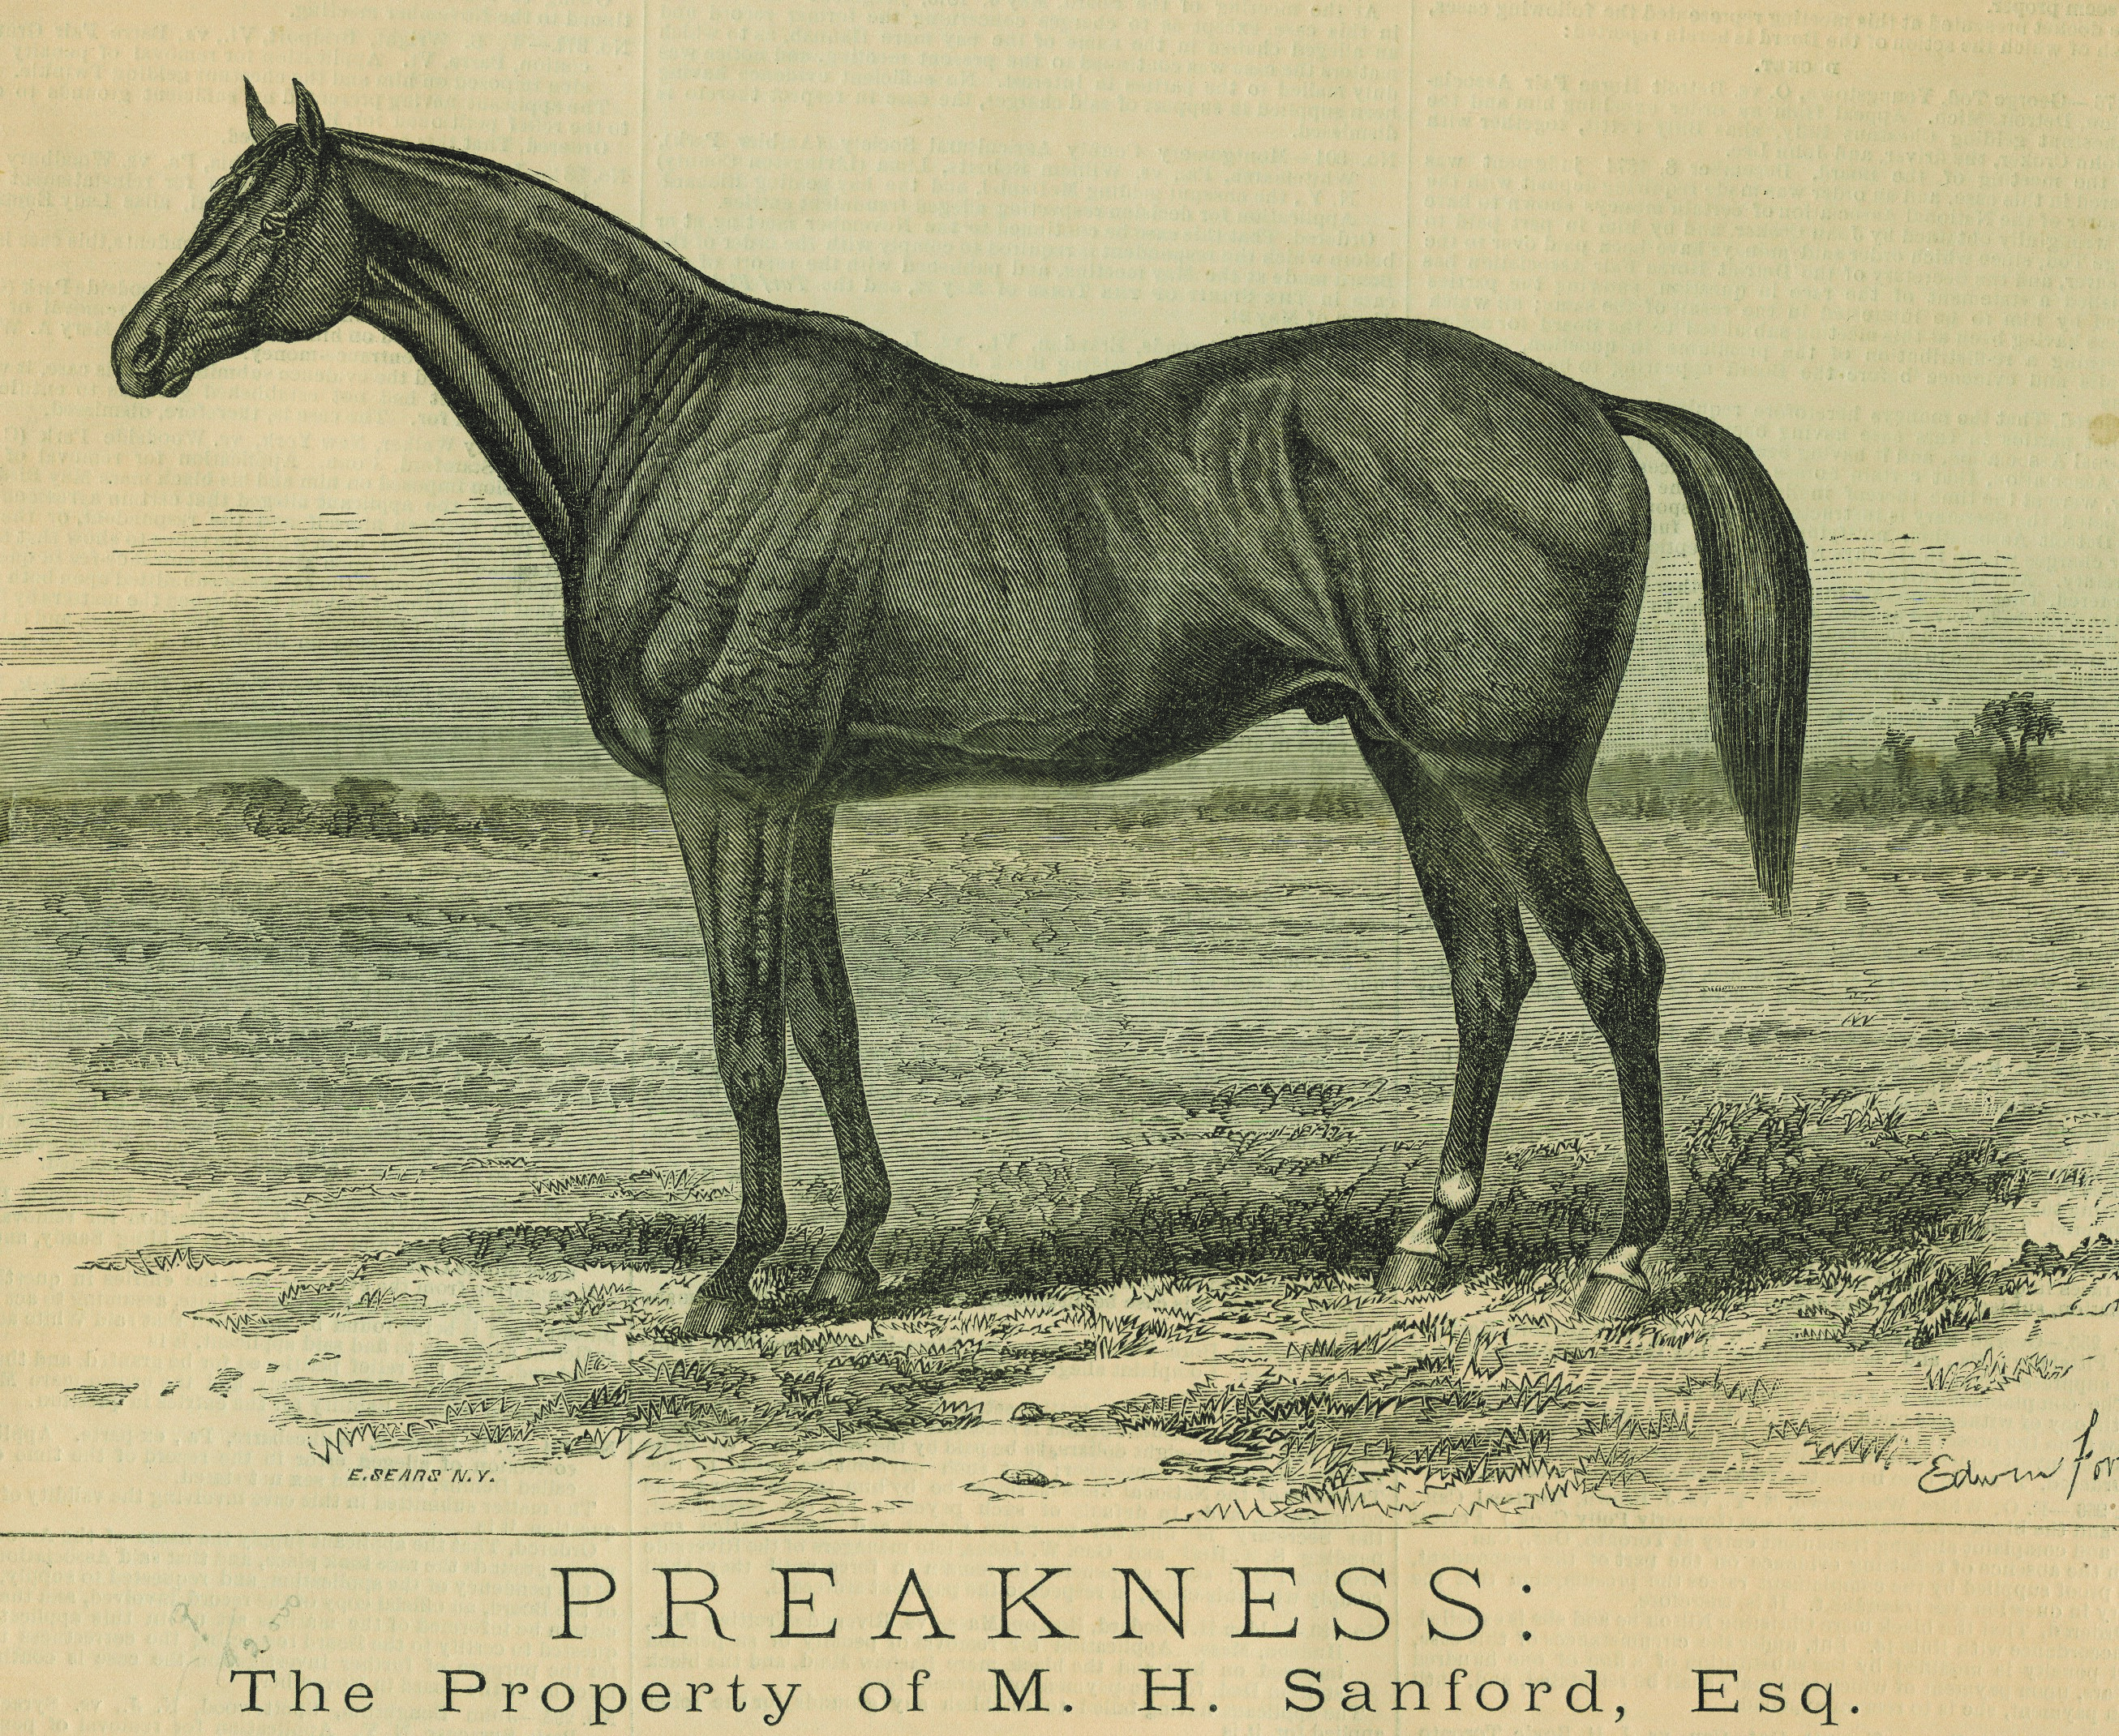 A likeness of Preakness from the "Spirit of the Times," July 31, 1875 (Keeneland Library Collection)